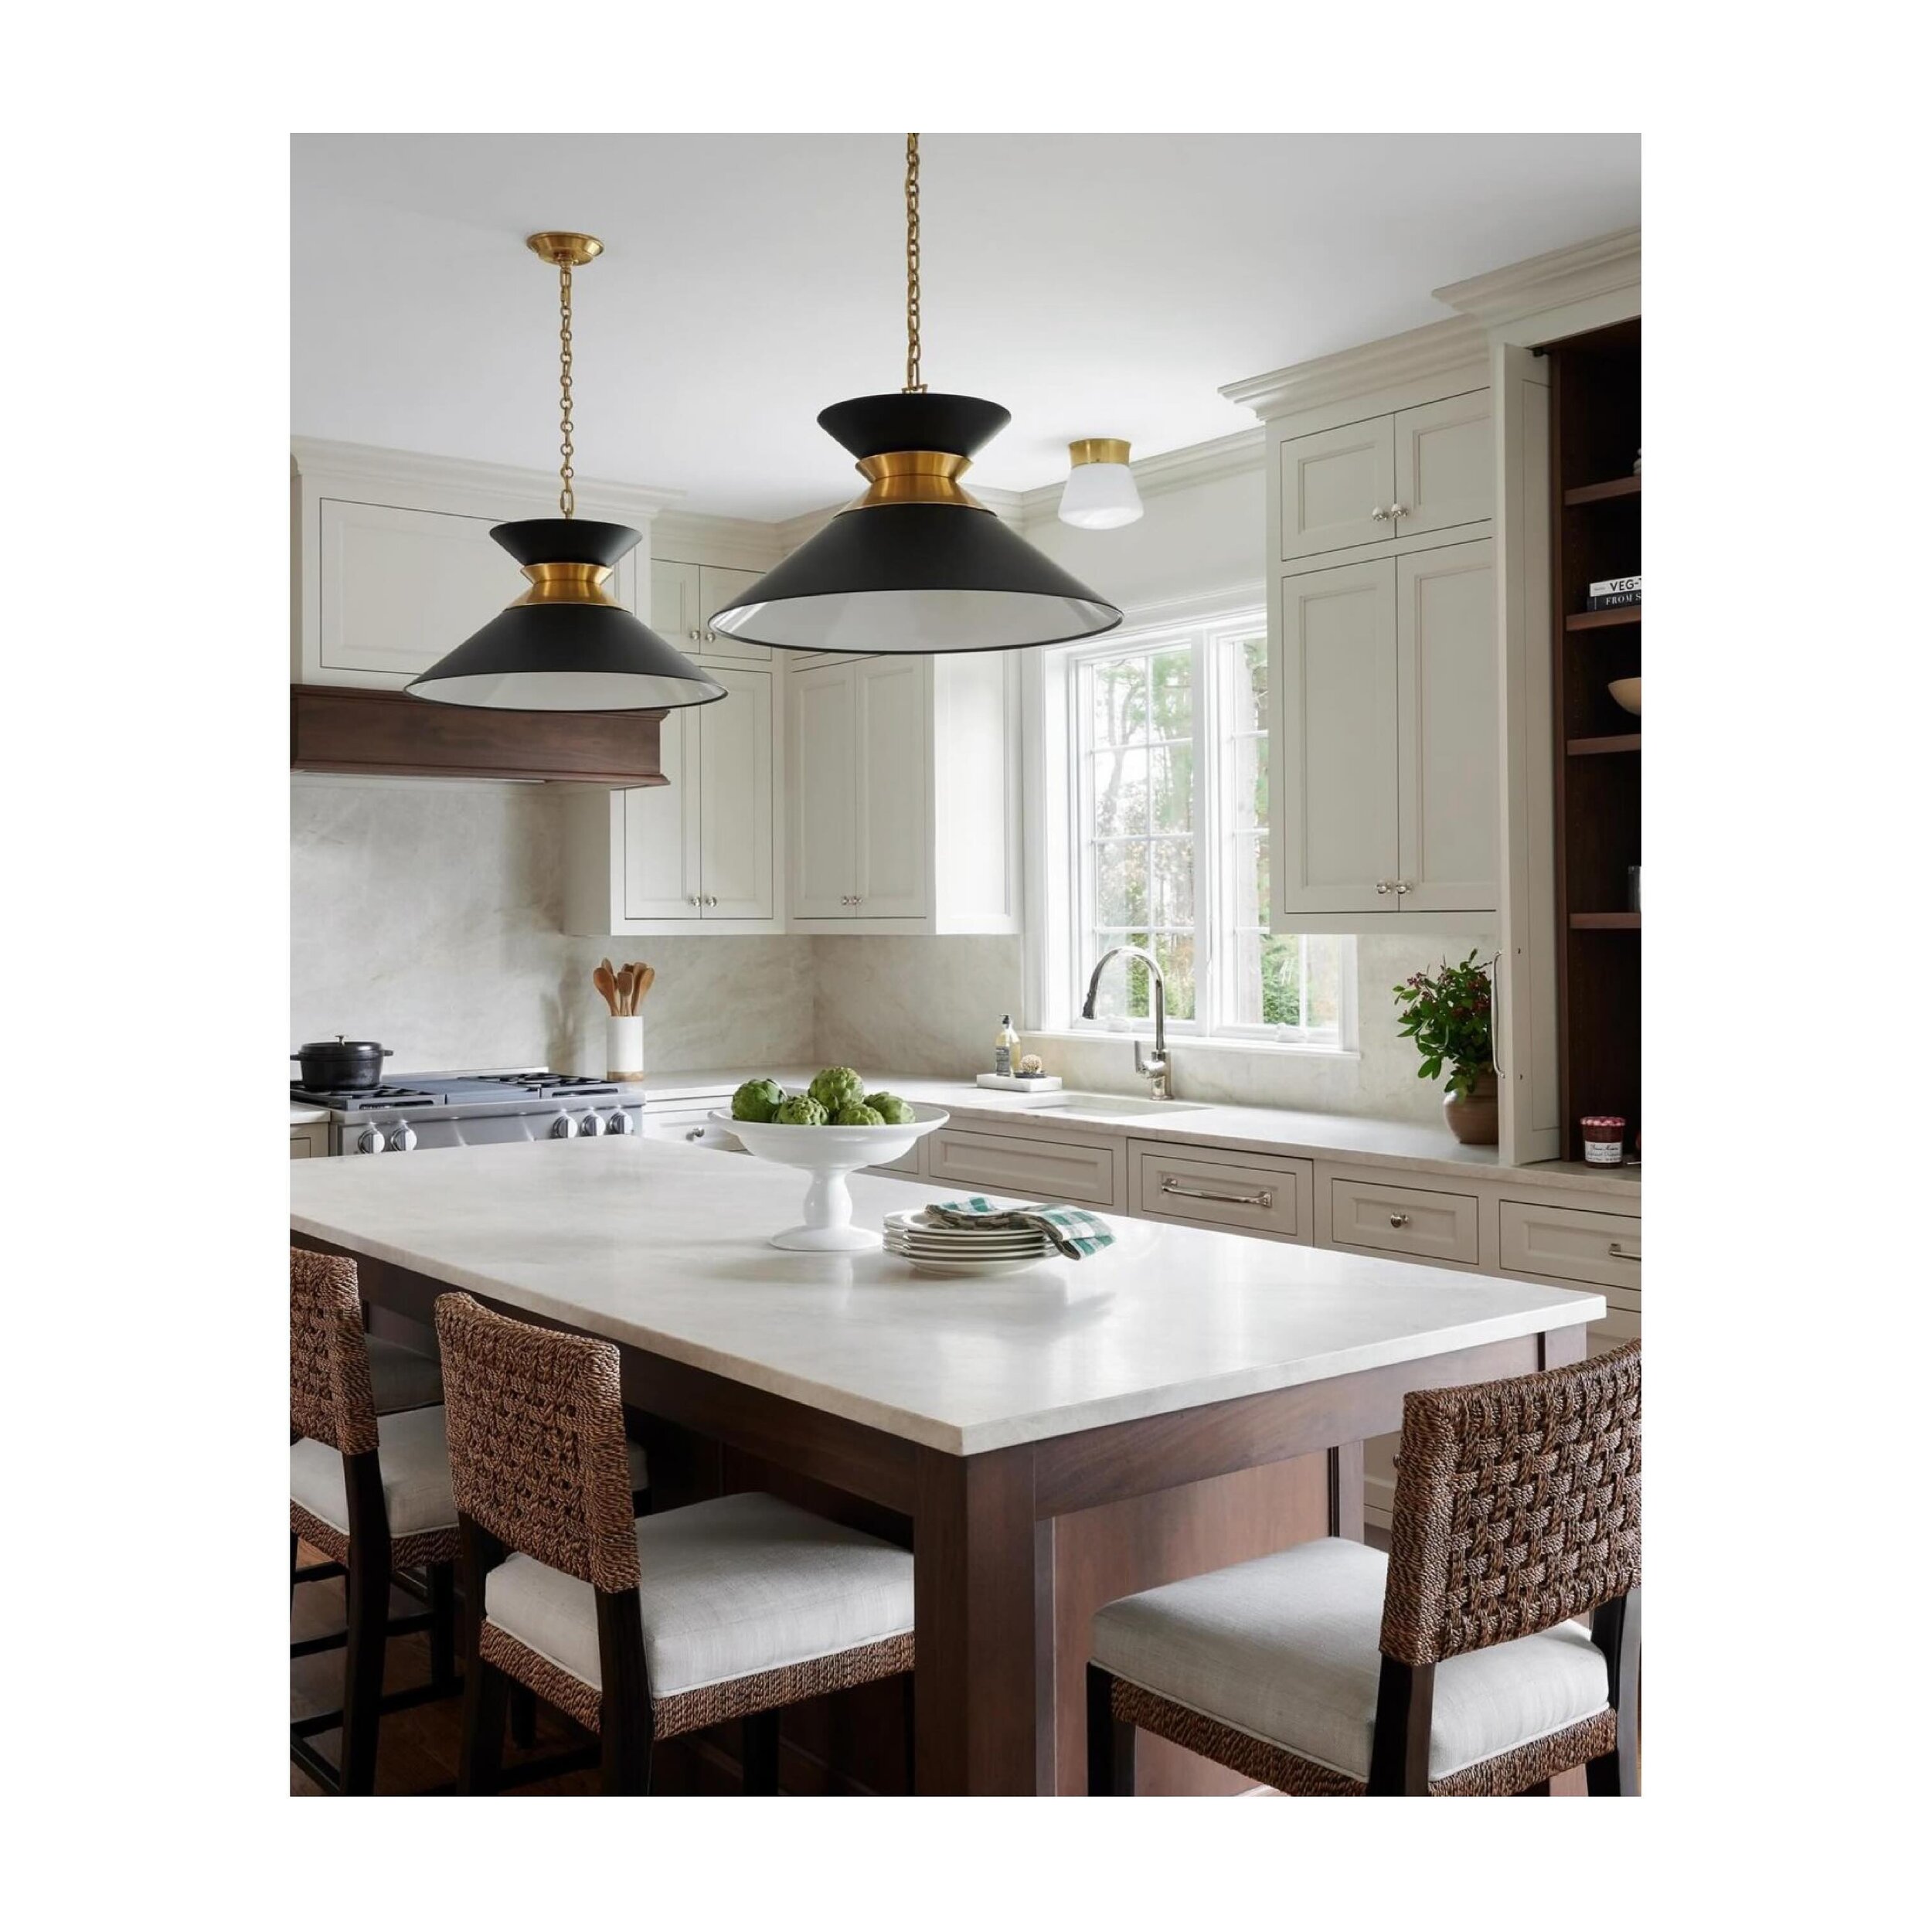 This week&rsquo;s SSDC spotlight is on our member @jmhdesign ✨Jeannie&rsquo;s project was featured on @houzz list of 10 most popular kitchens in 2024!  Congrats to Jeannie! We love this beautiful kitchen project too! 

Contact us if you would like to